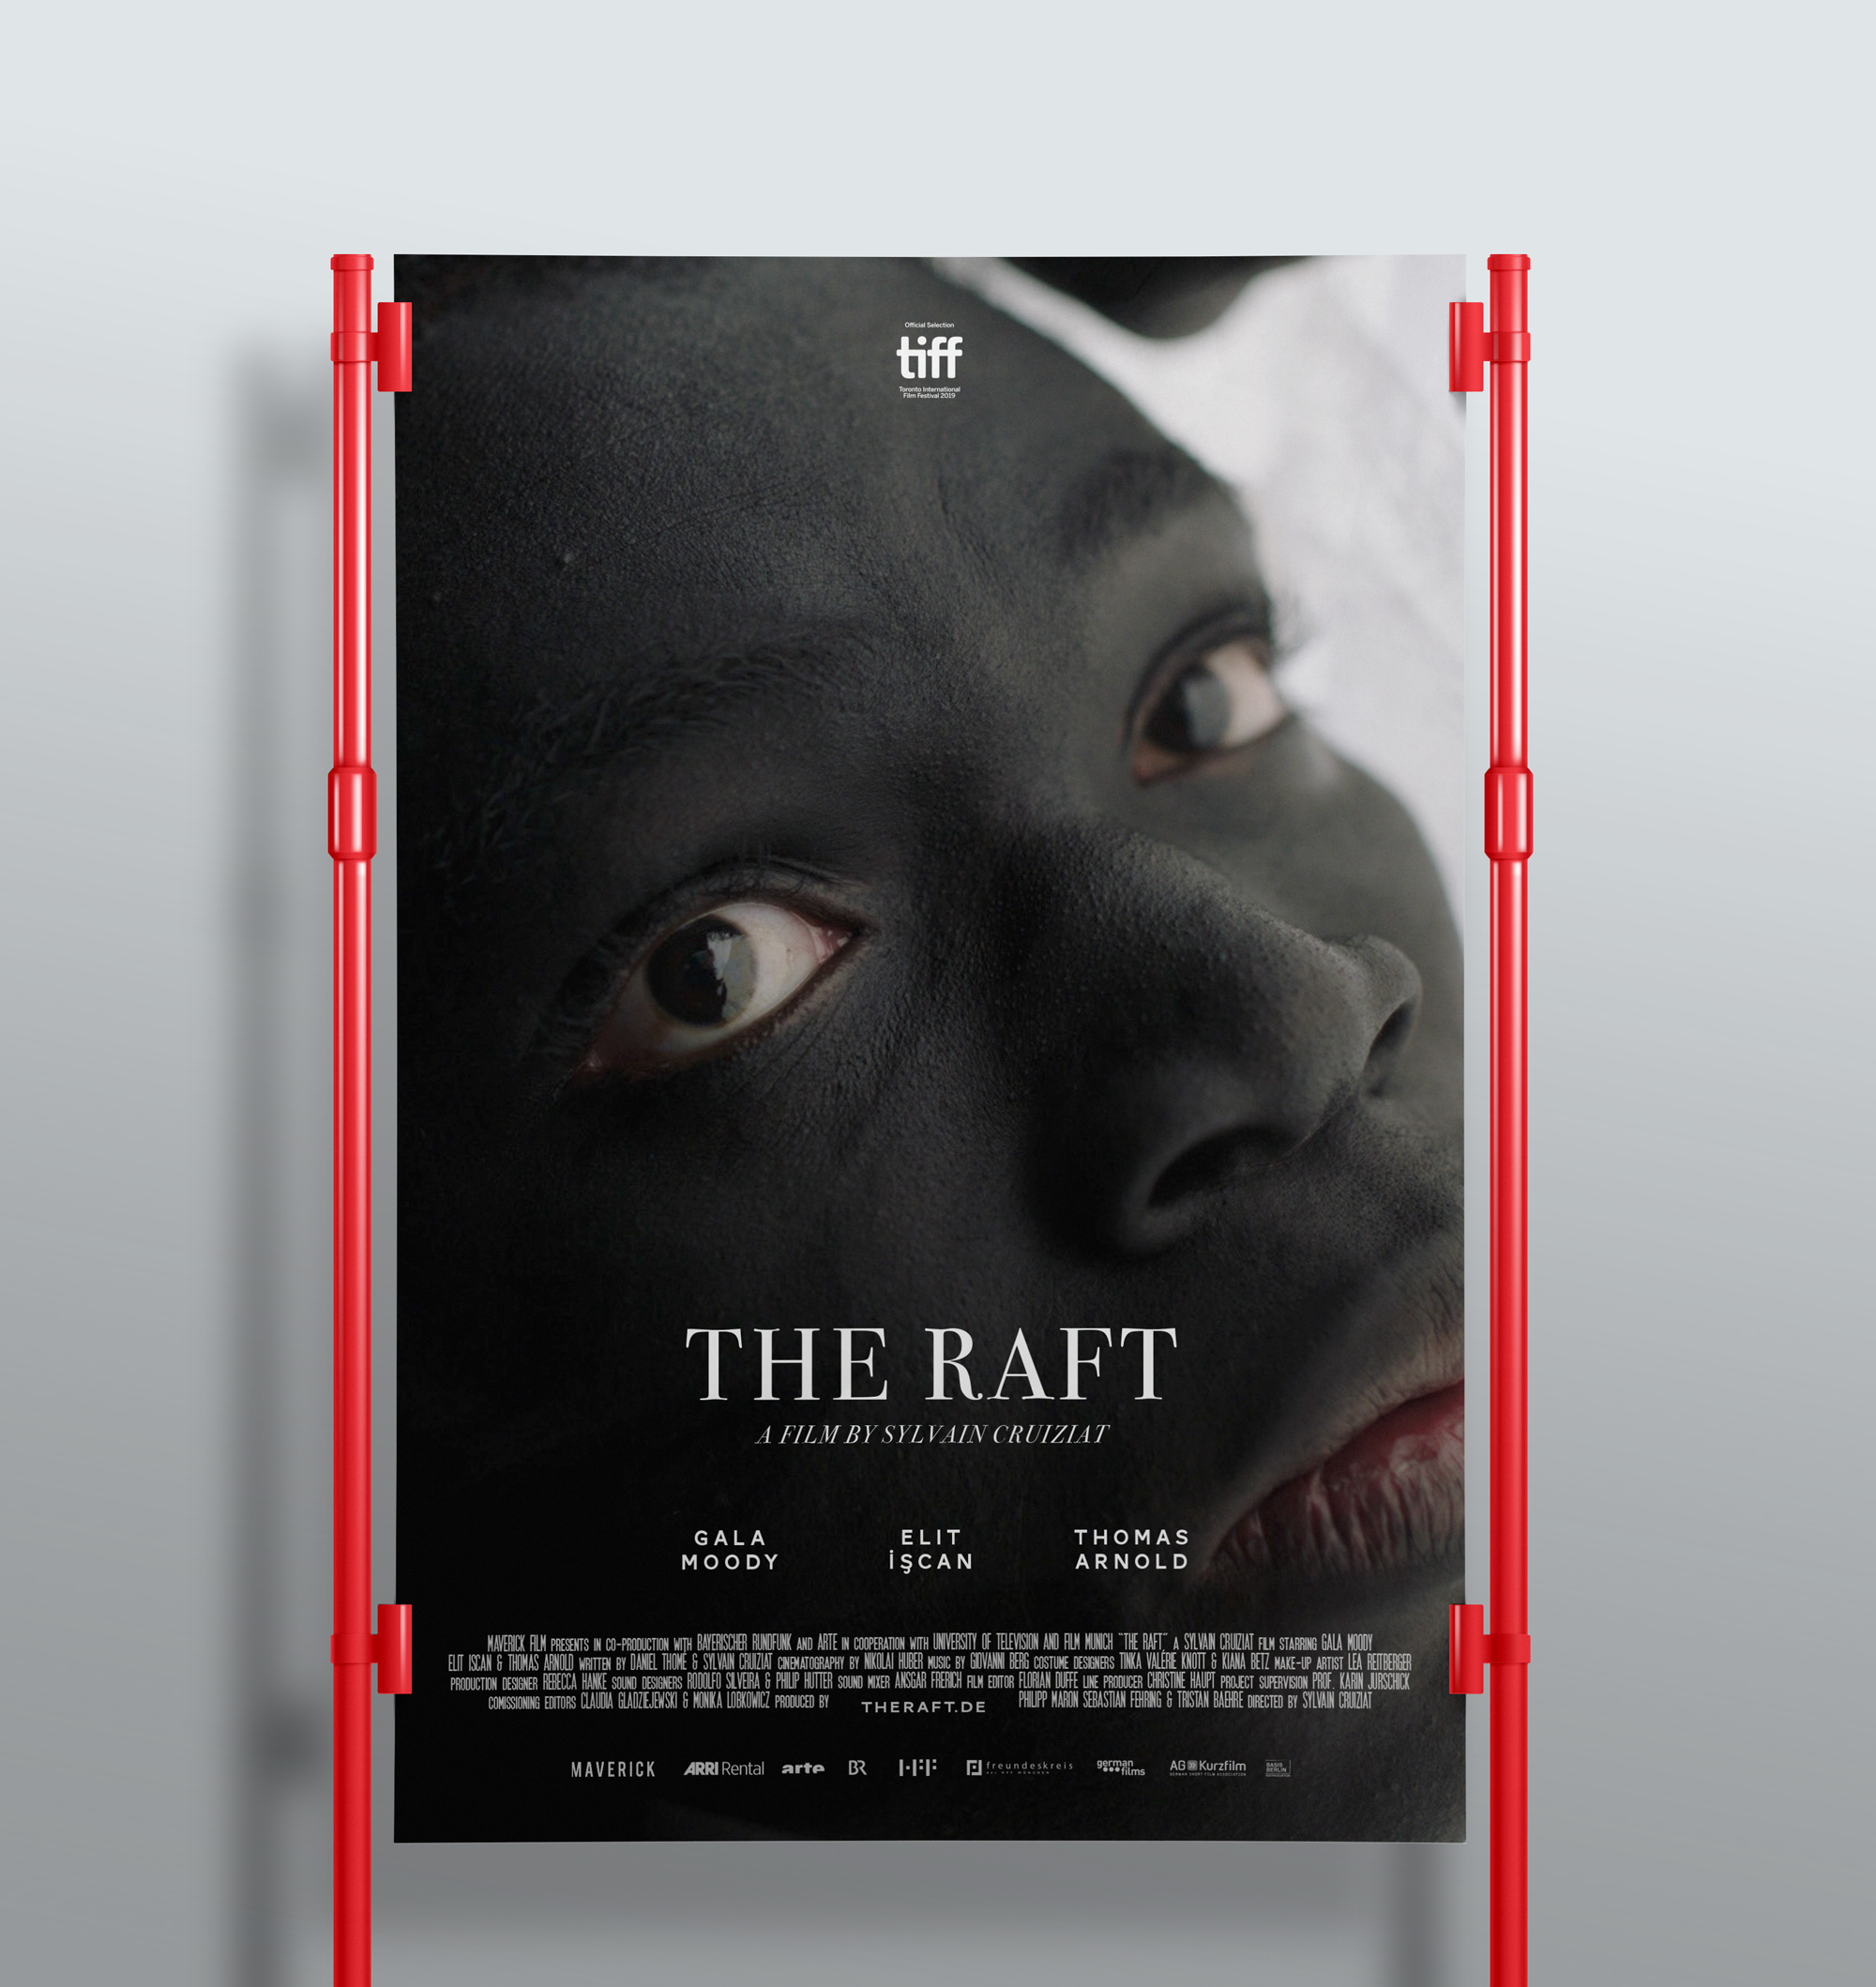 The Raft movie poster designed by Tobias Heumann